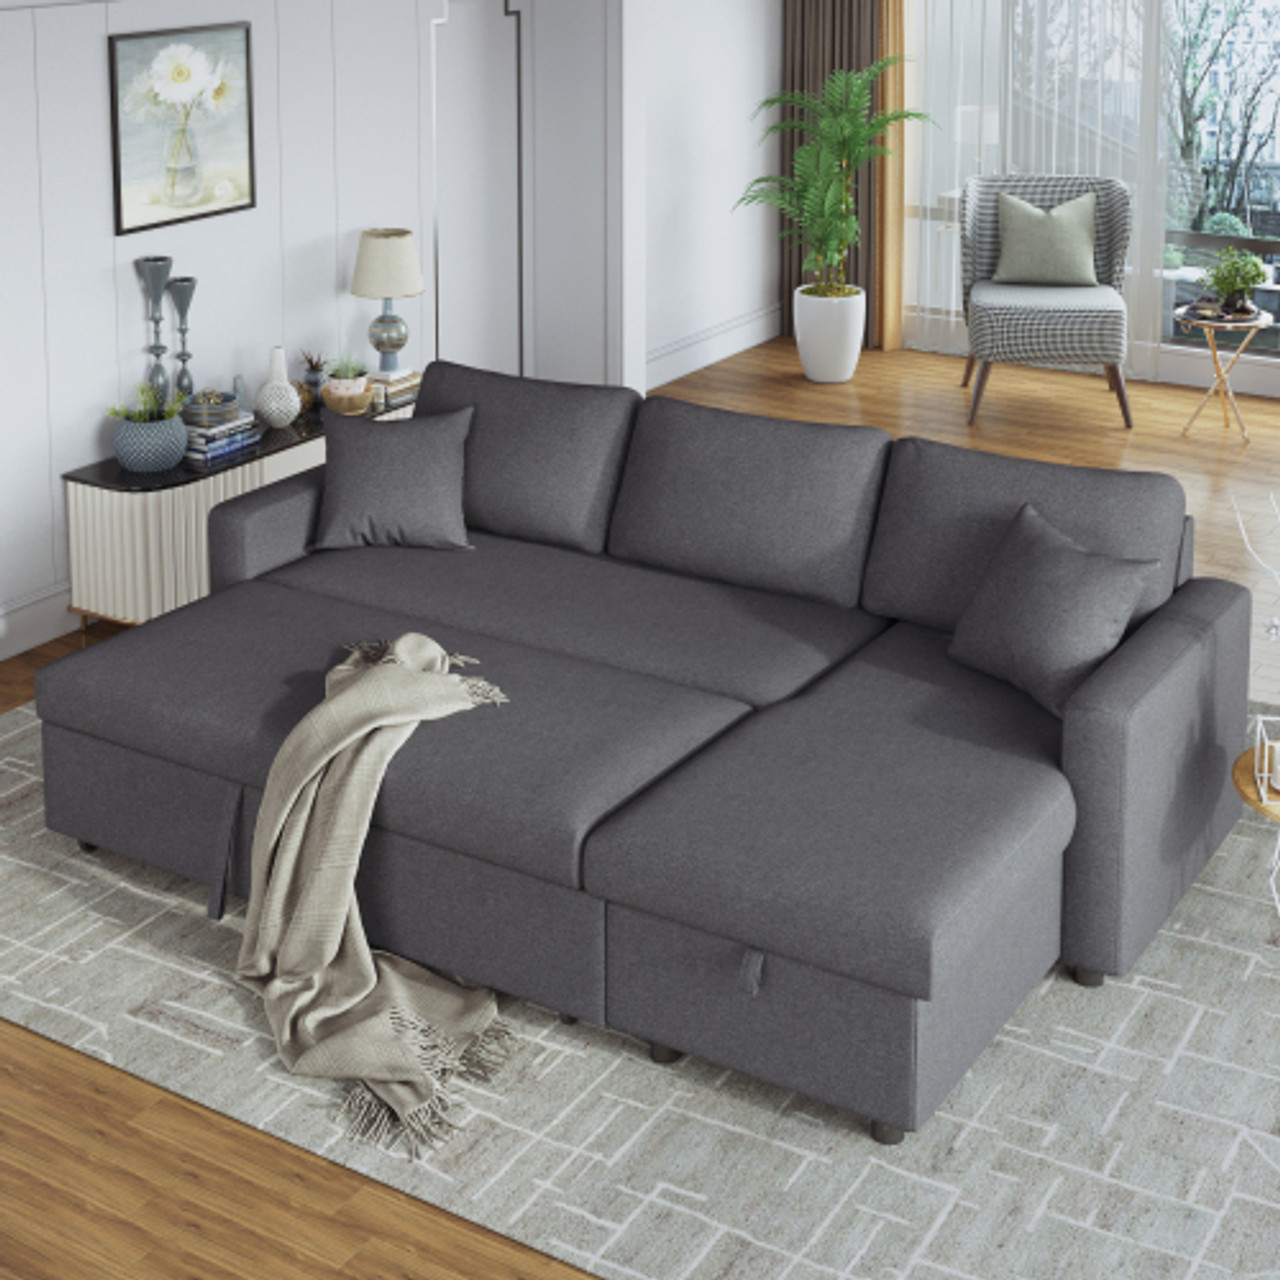 Abrihome Grey U-STYLE Upholstery Sleeper Sectional Sofa with Storage Space  and 2 Tossing Cushions